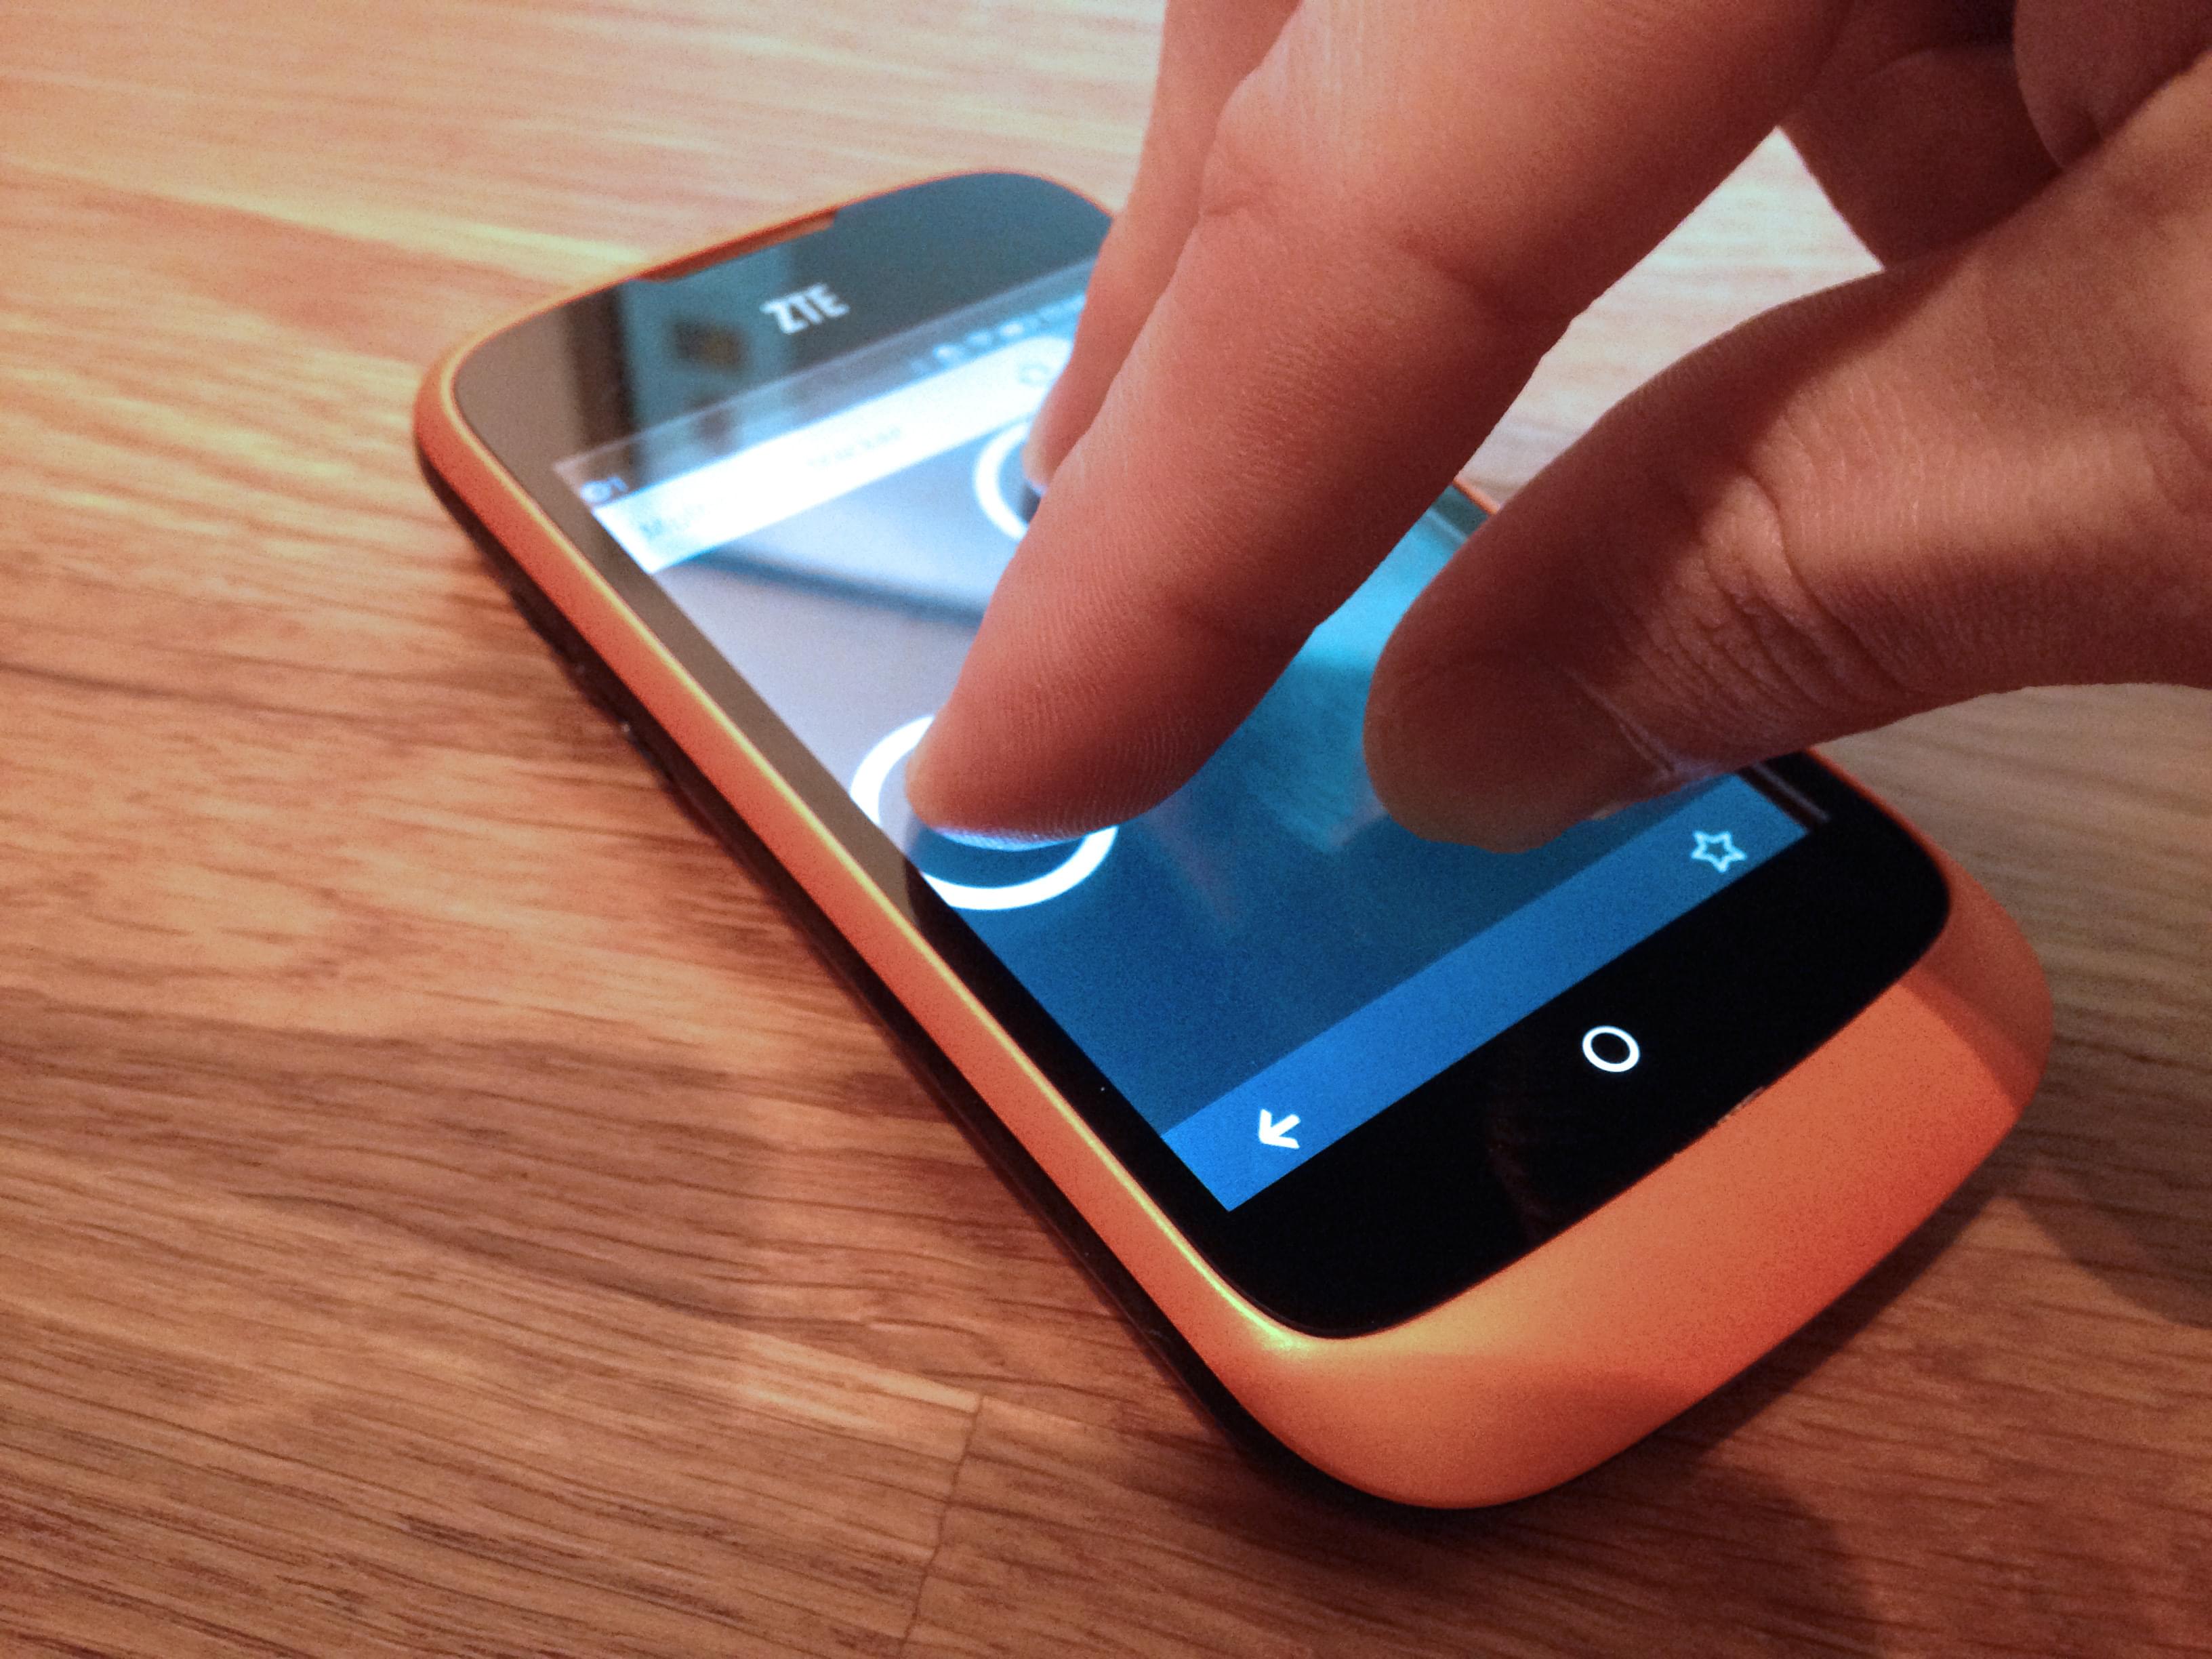 ZTE Open Firefox OS 1.1 only supports 2 fingers